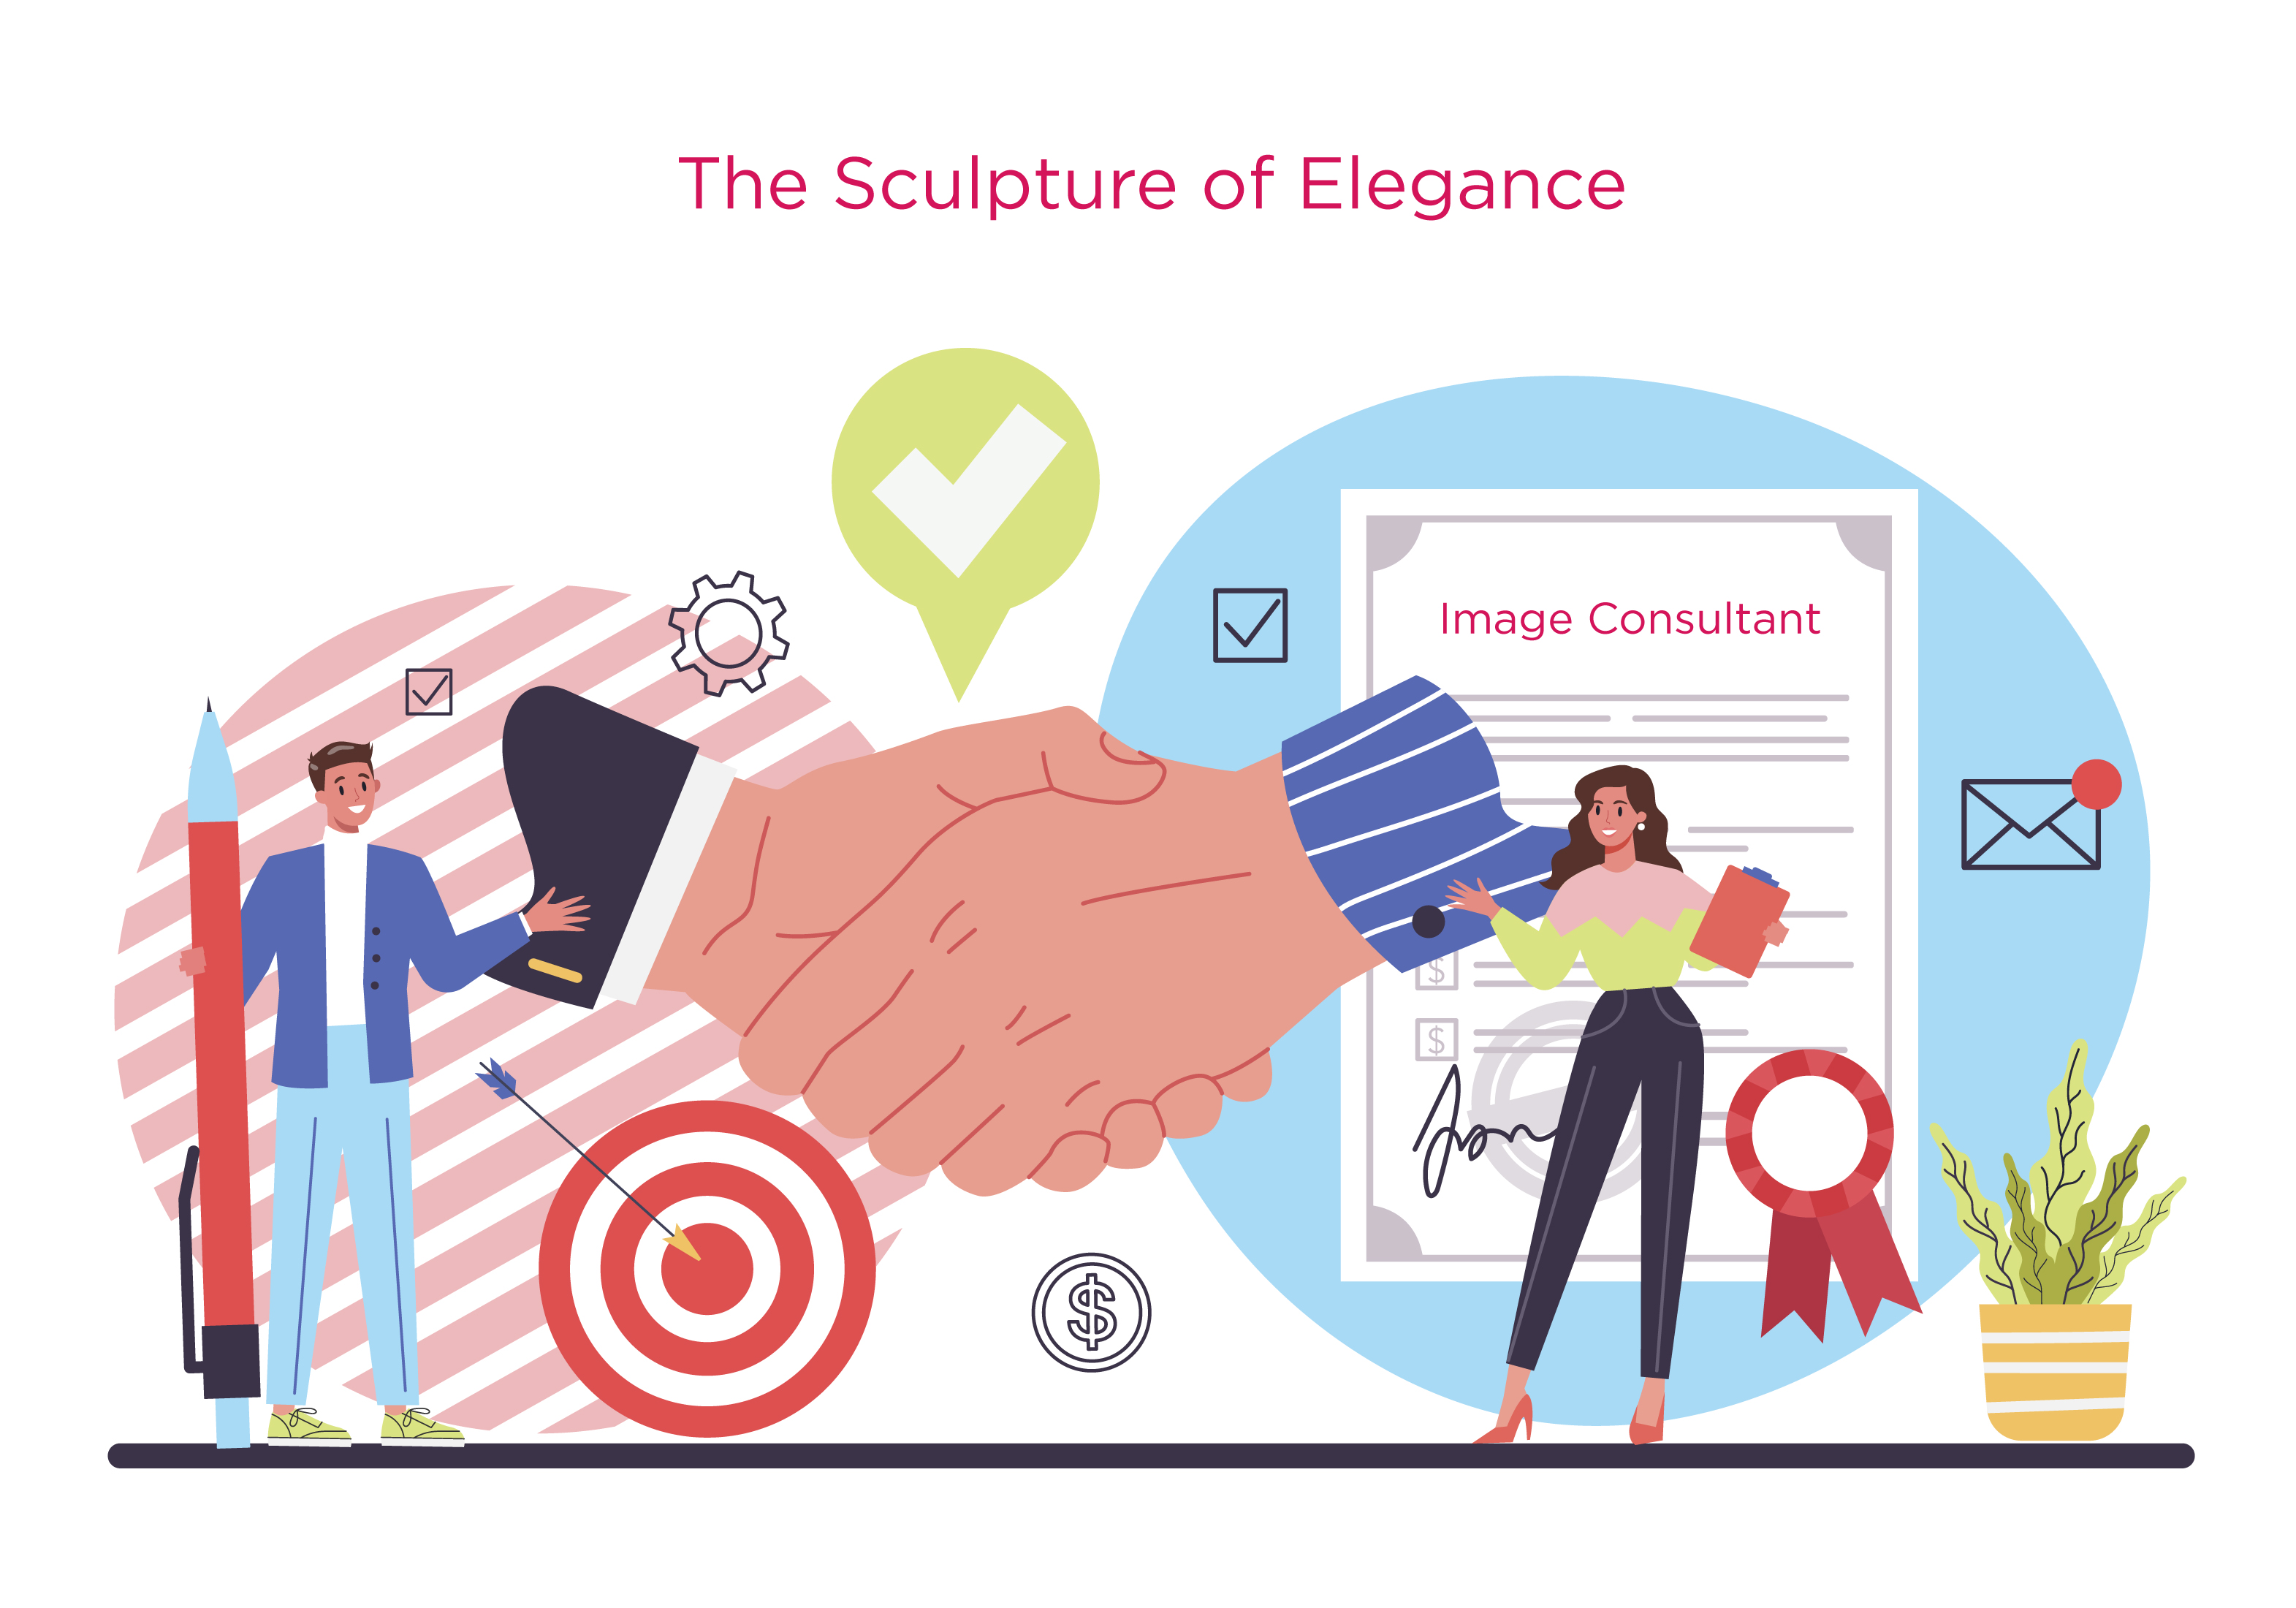 Blog on Image Consultant - The Sculpture of Elegance by Shweta Garg